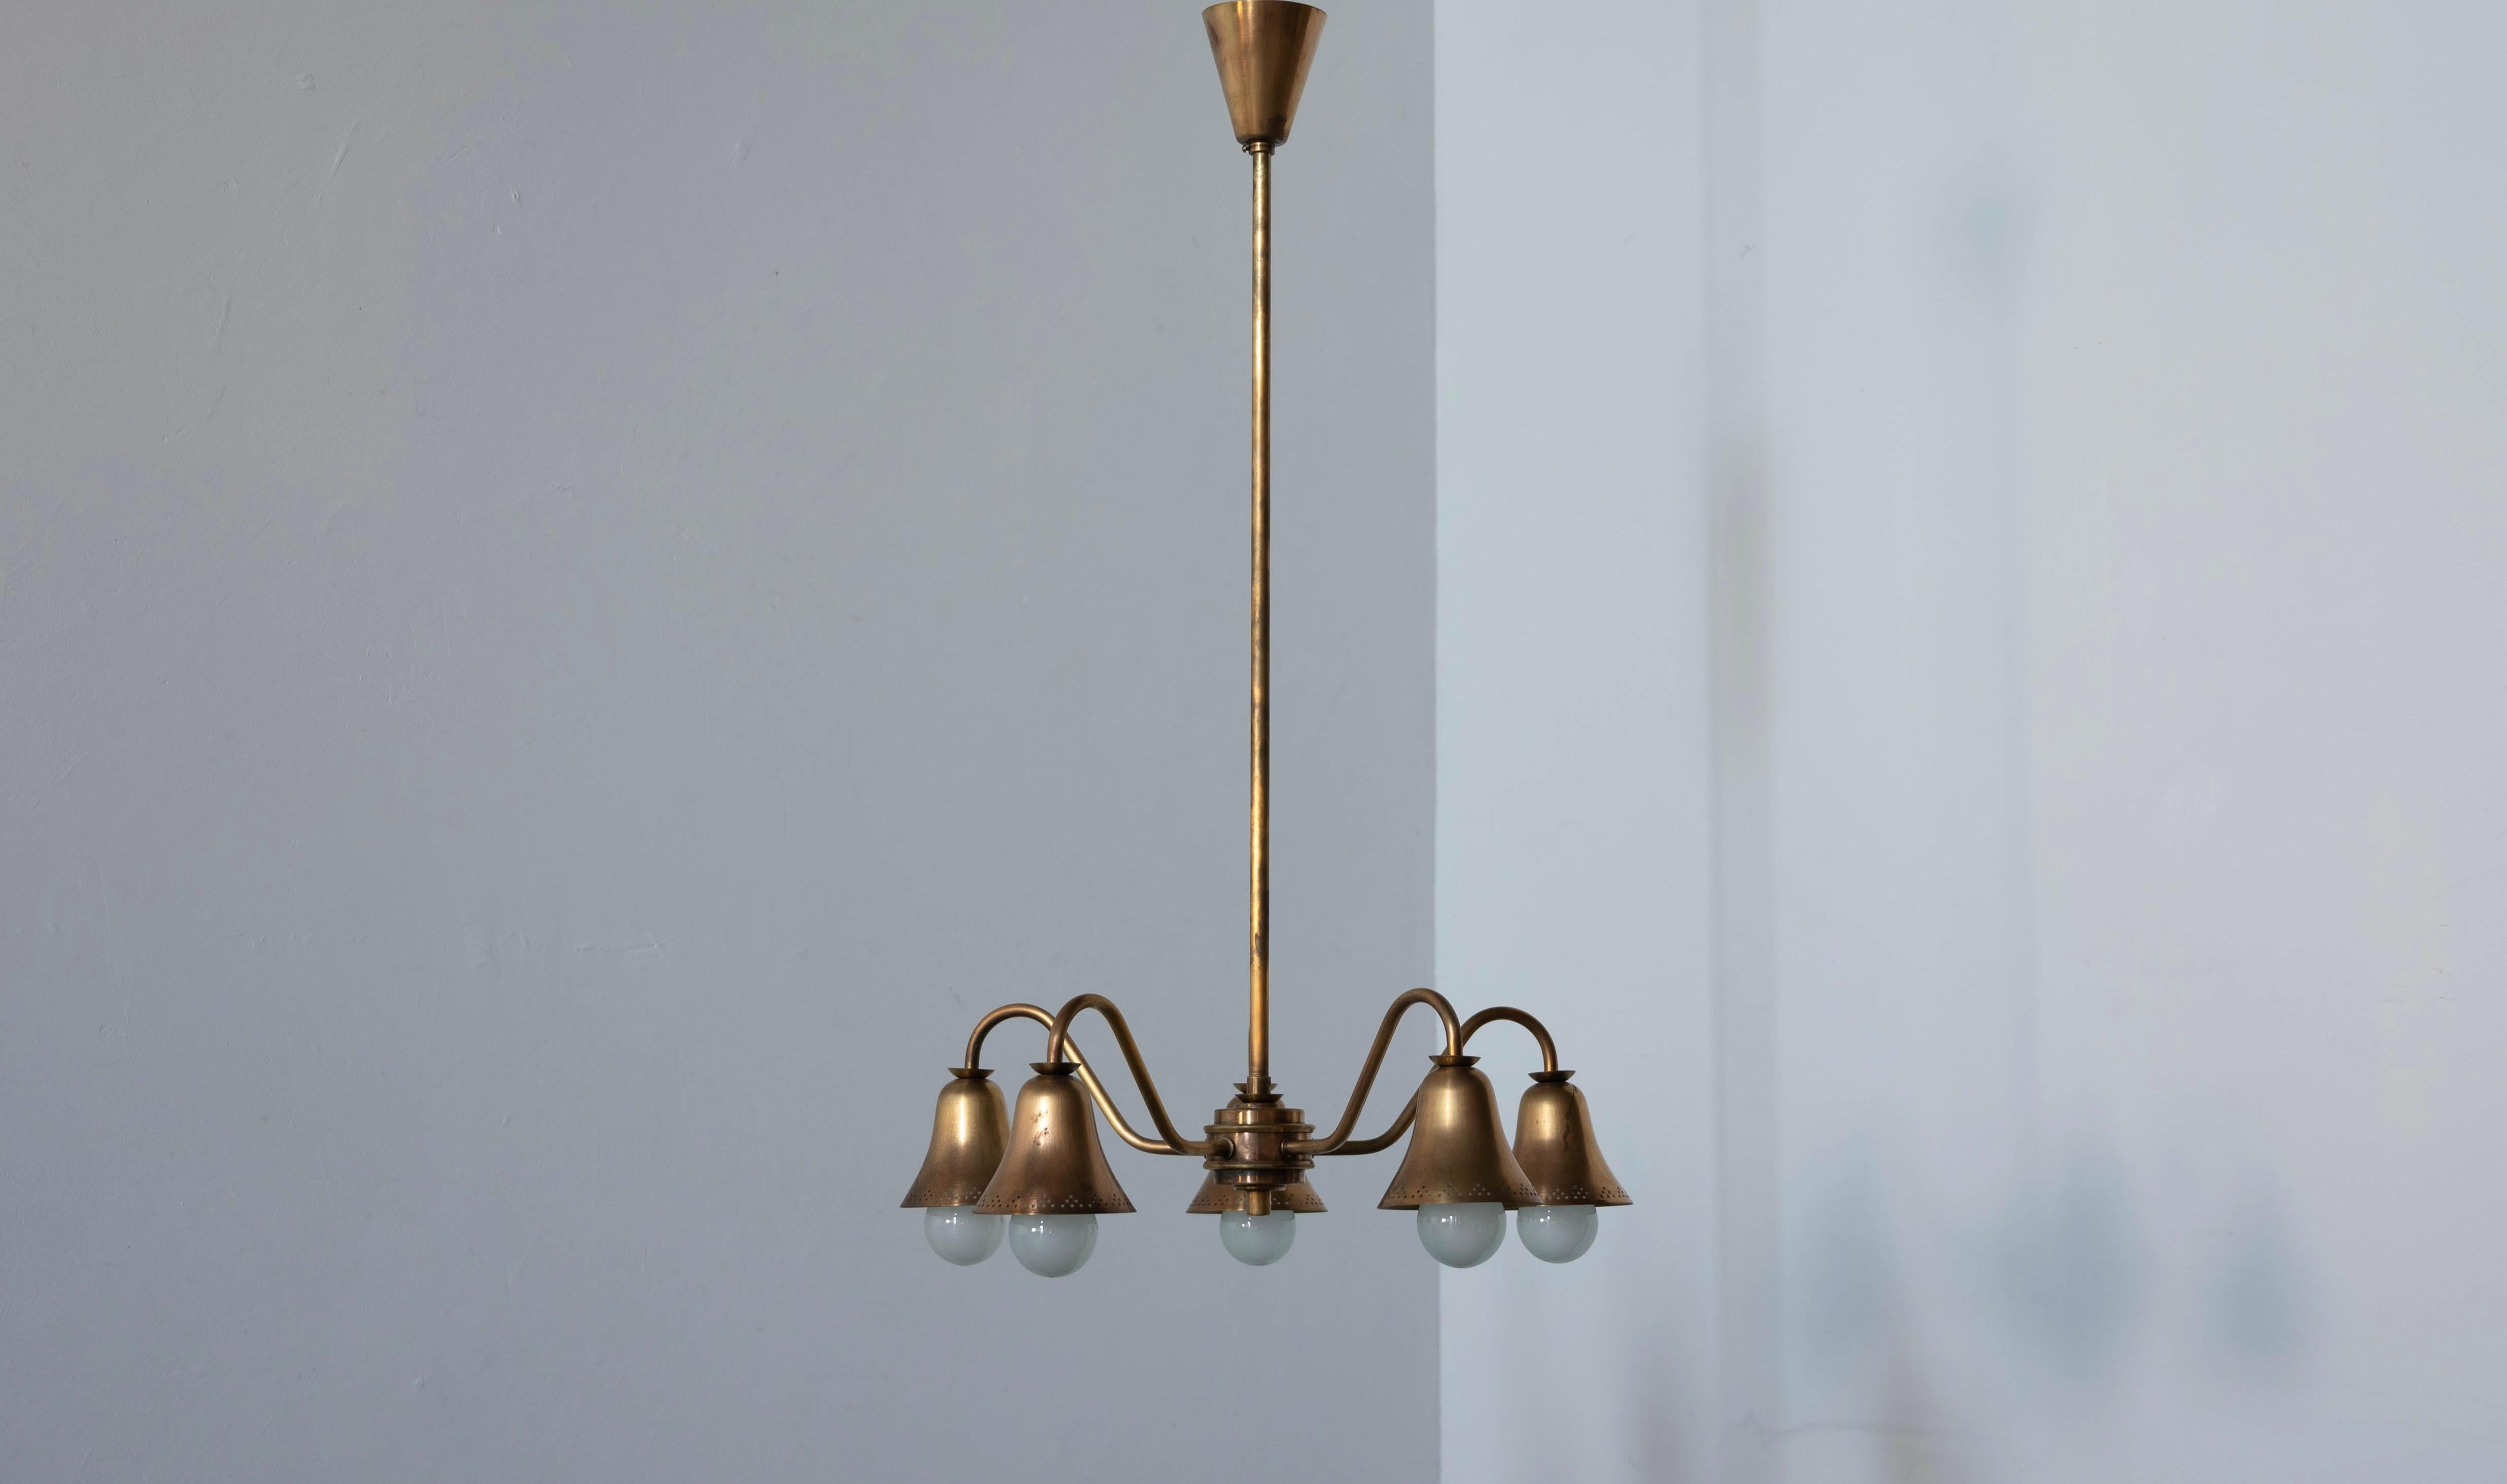 A five-armed chandelier executed in brass. Designed and produced in Denmark, 1930s.

Stated dimensions exclude installed lampshades illustrated.